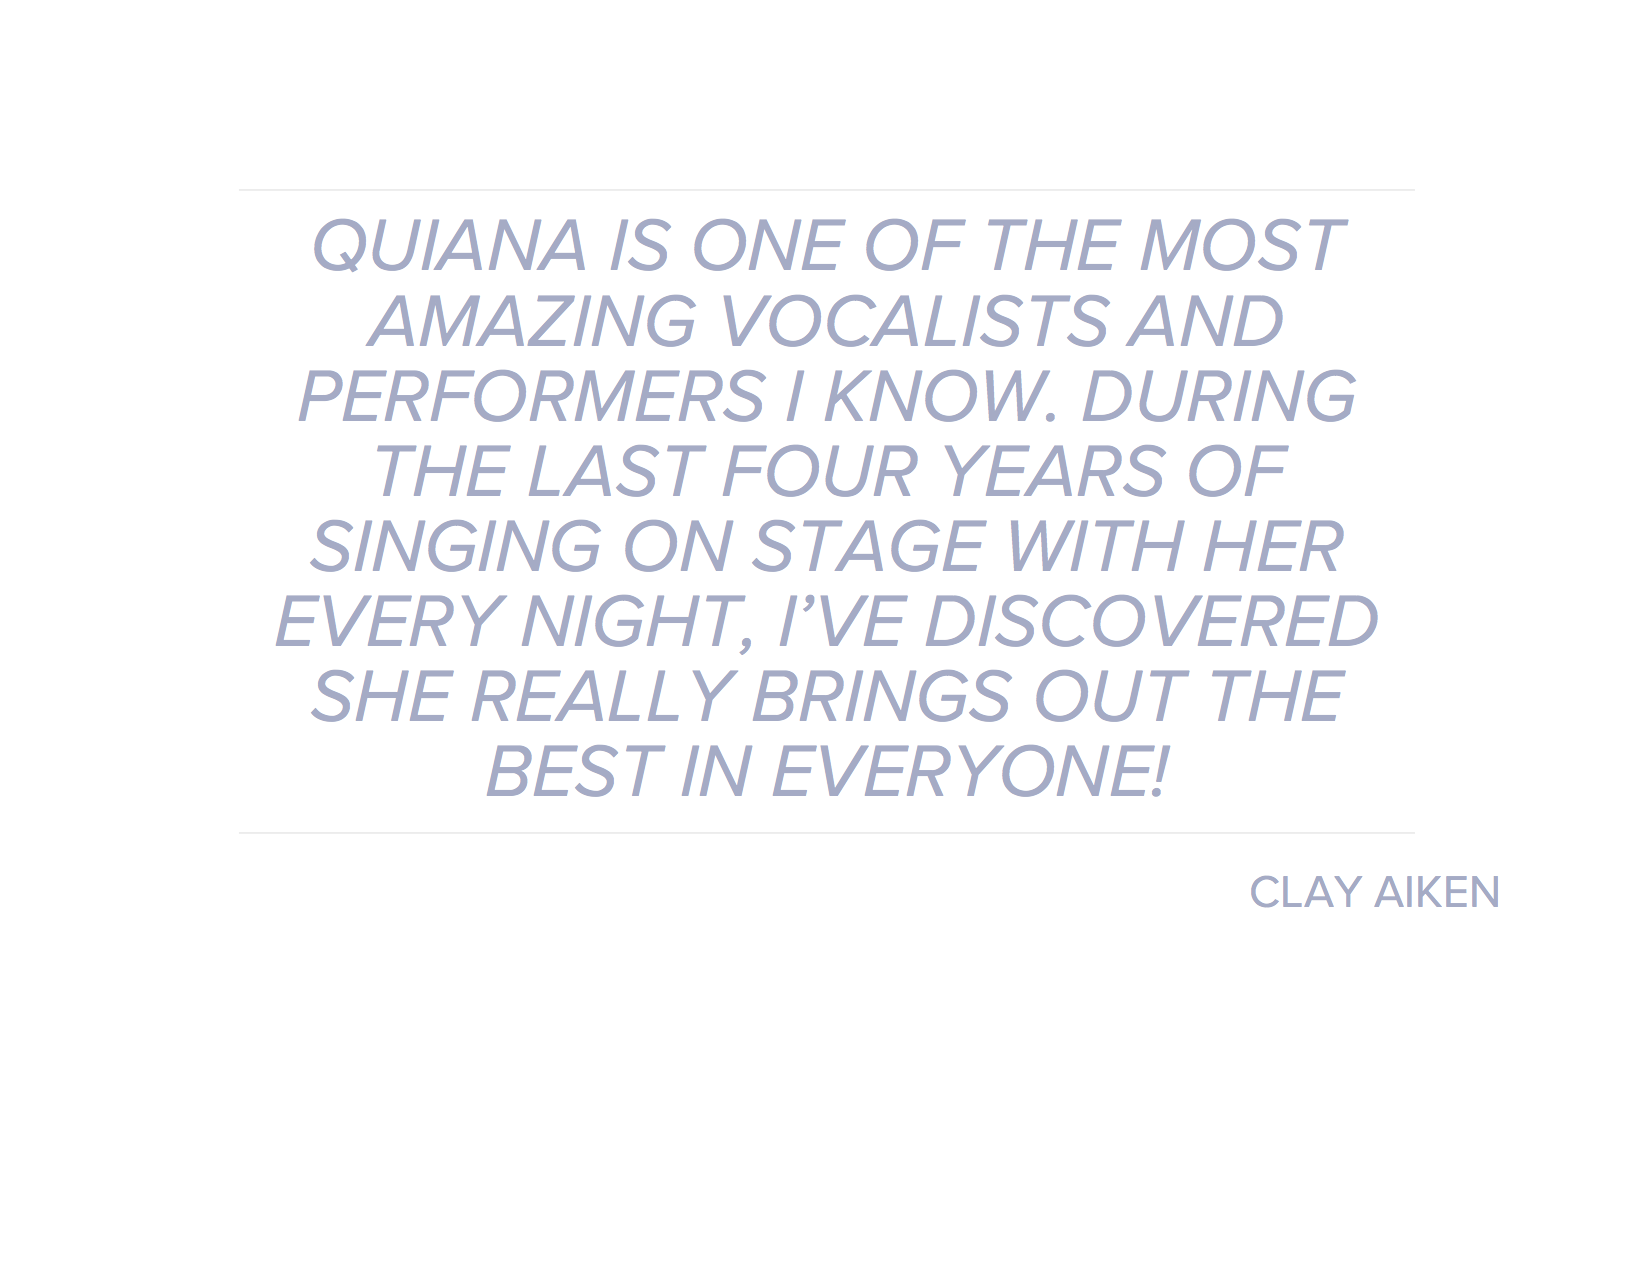 QUIANA IS ONE OF THE MOST AMAZING VOCALISTS AND PERFORMERS I KNOW.png